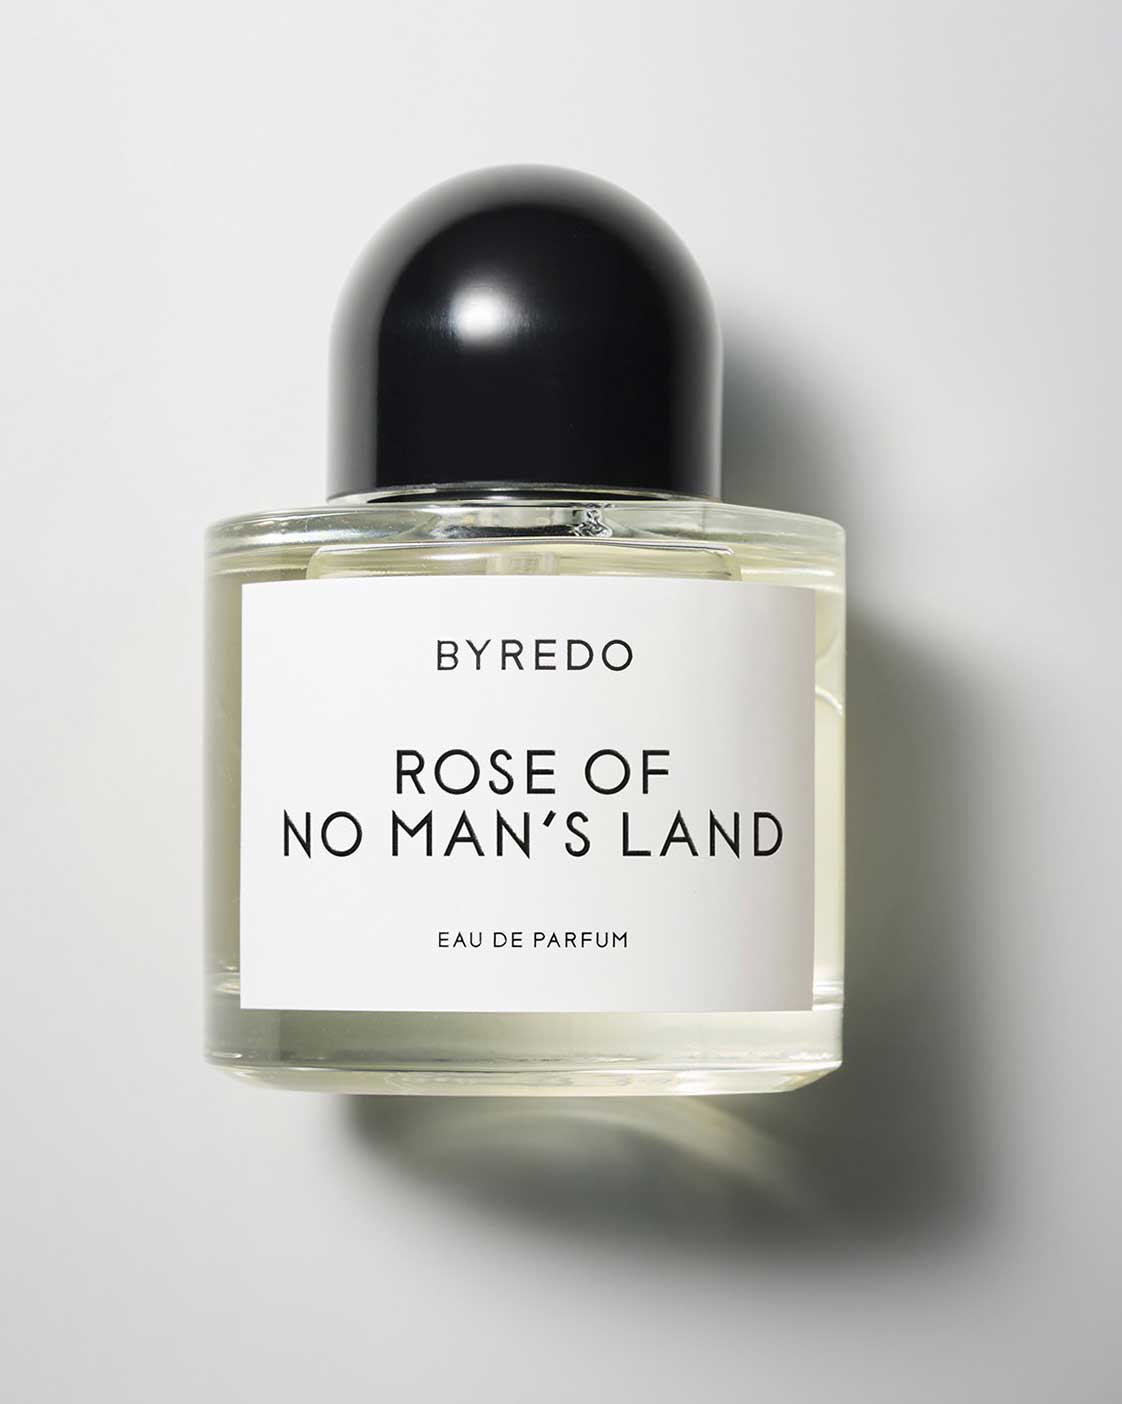 Swedish luxury perfume brand Byredo acquired by Puig high-end group 